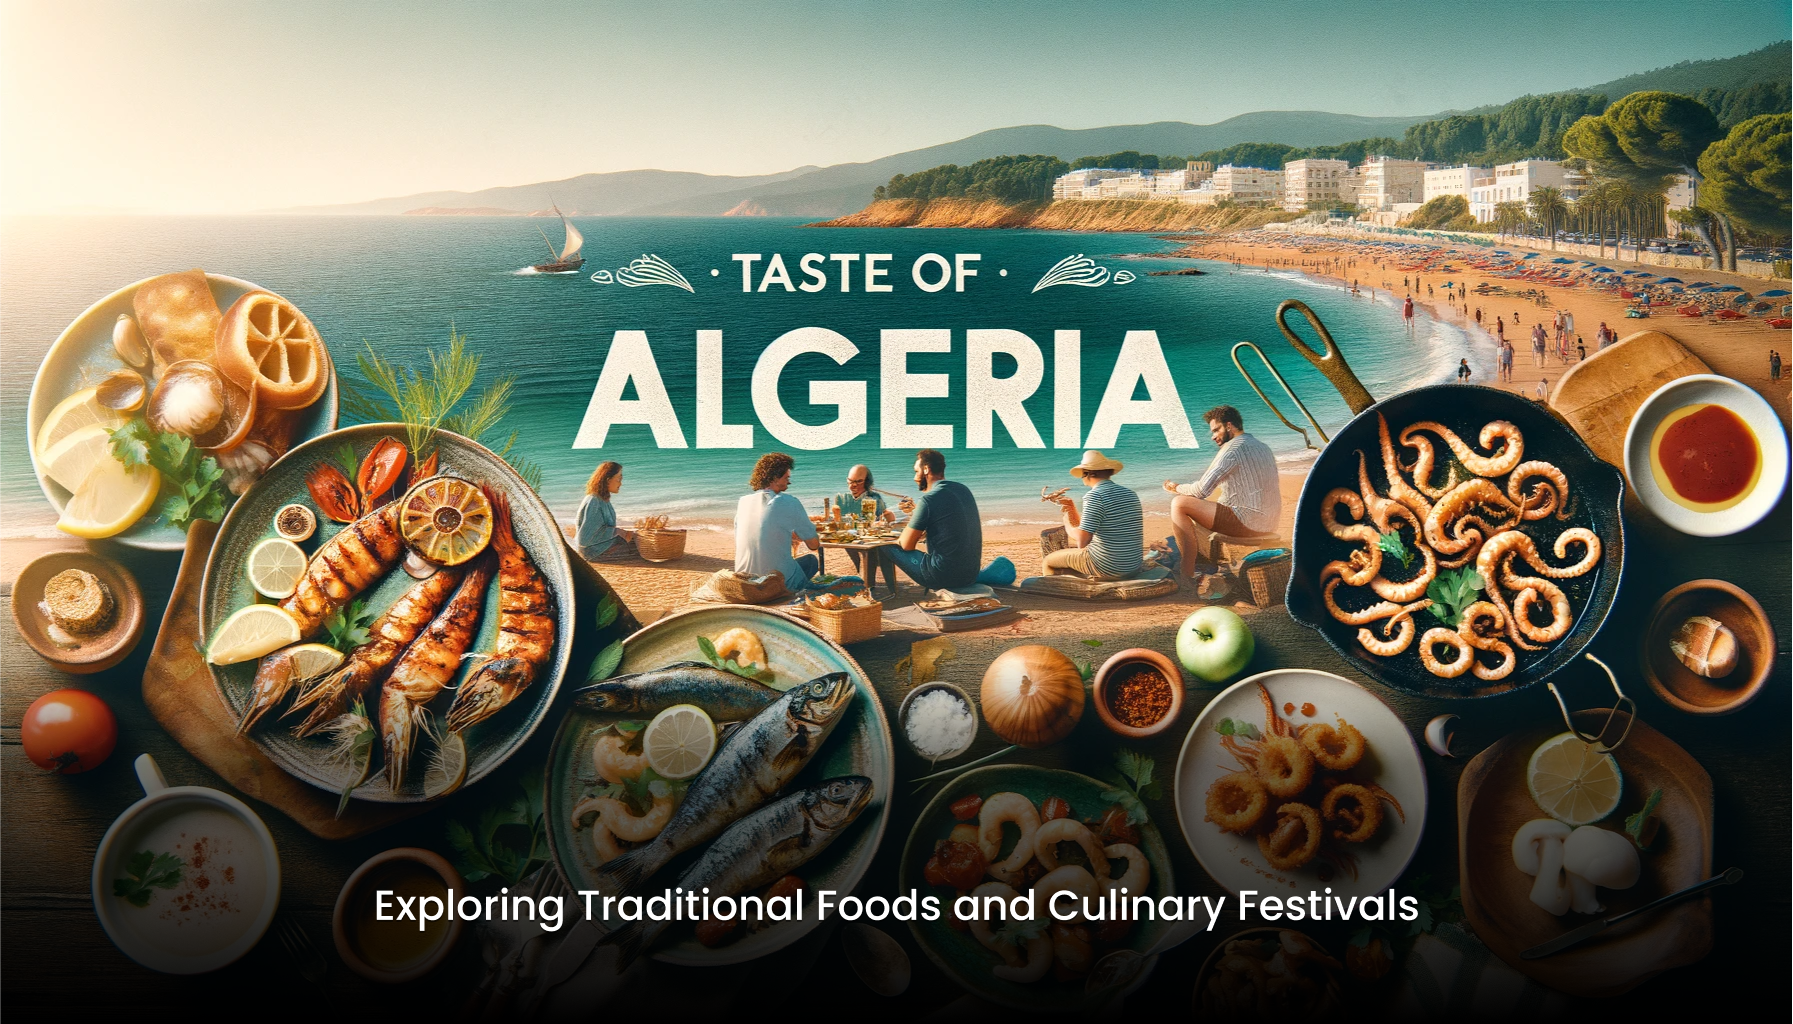 Taste of Algeria: Exploring Traditional Foods and Culinary Festivals